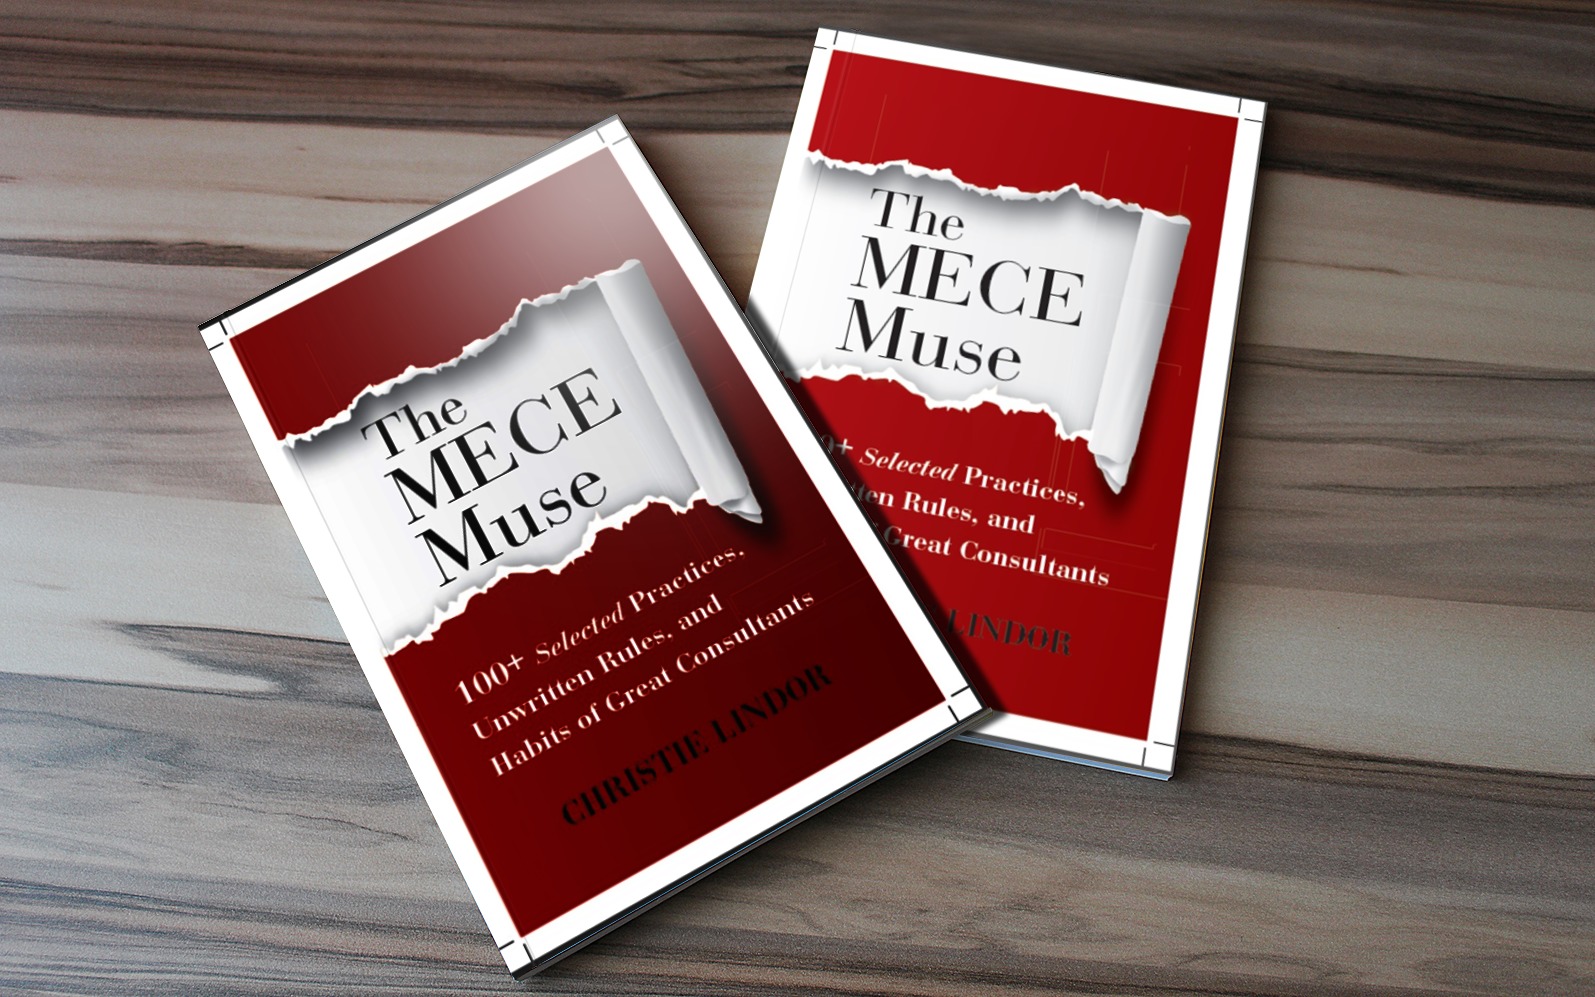 book of the week the mece muse - lioness magazine